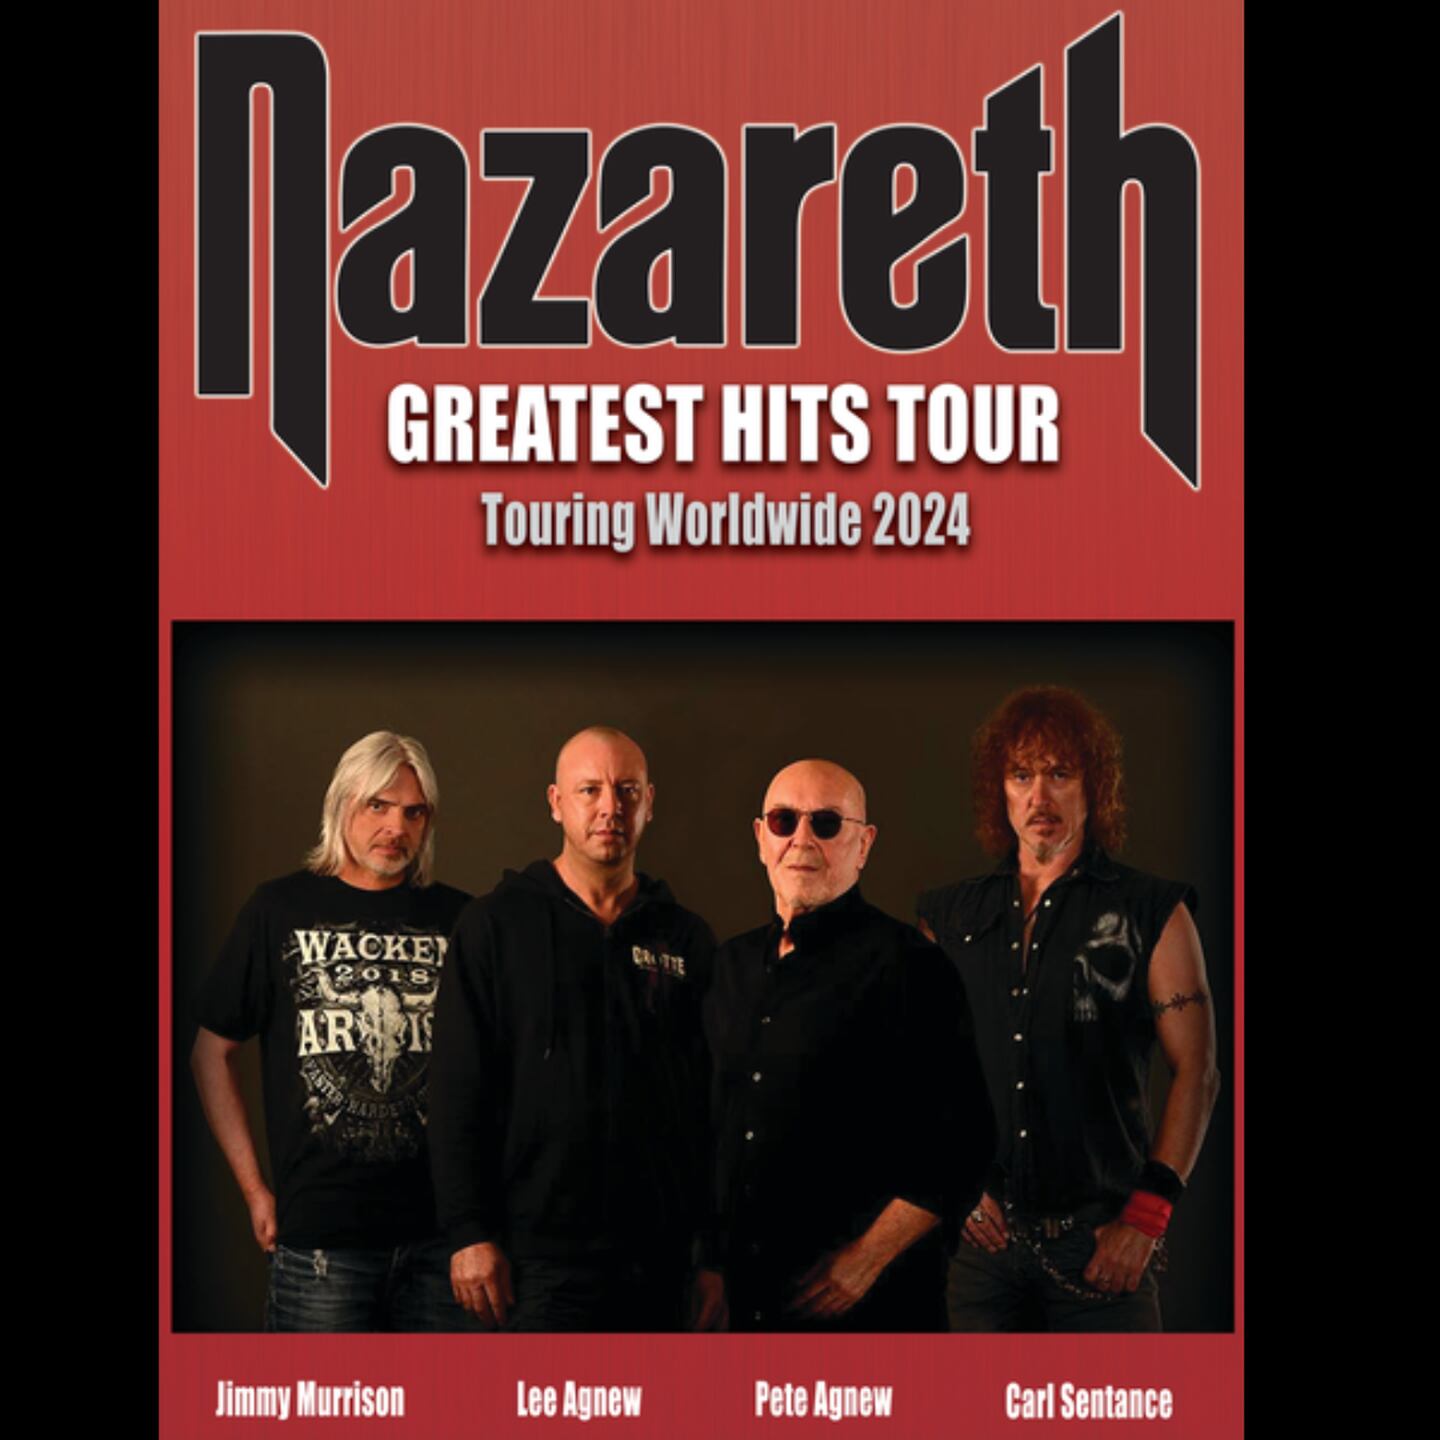 Scottish rockers Nazareth will perform at the Arcada Theatre in St. Charles on May 16, 2024.